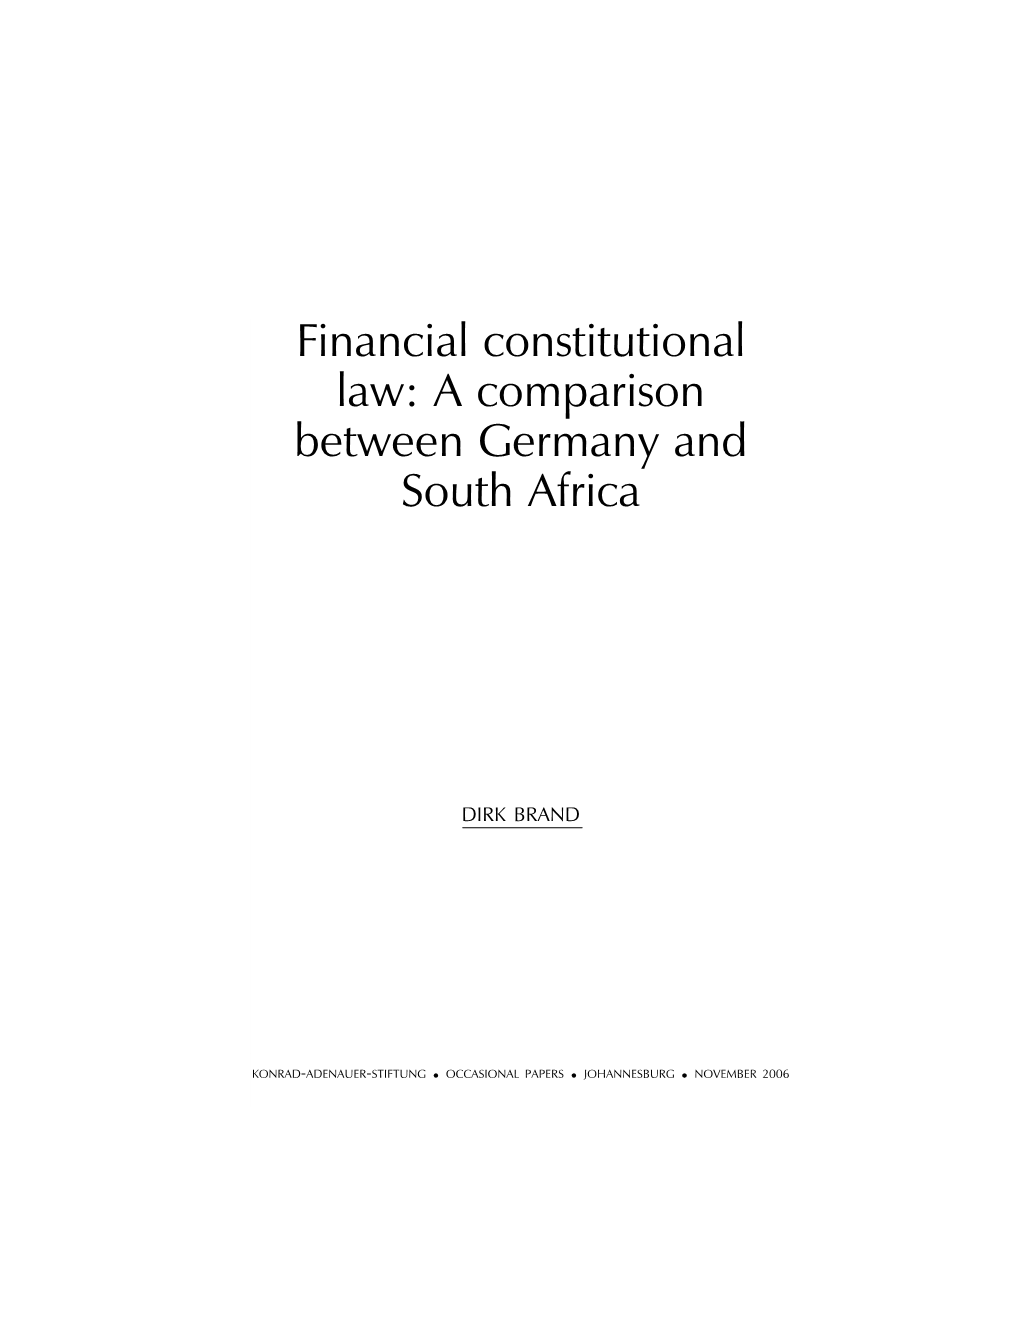 Financial Constitutional Law: a Comparison Between Germany and South Africa